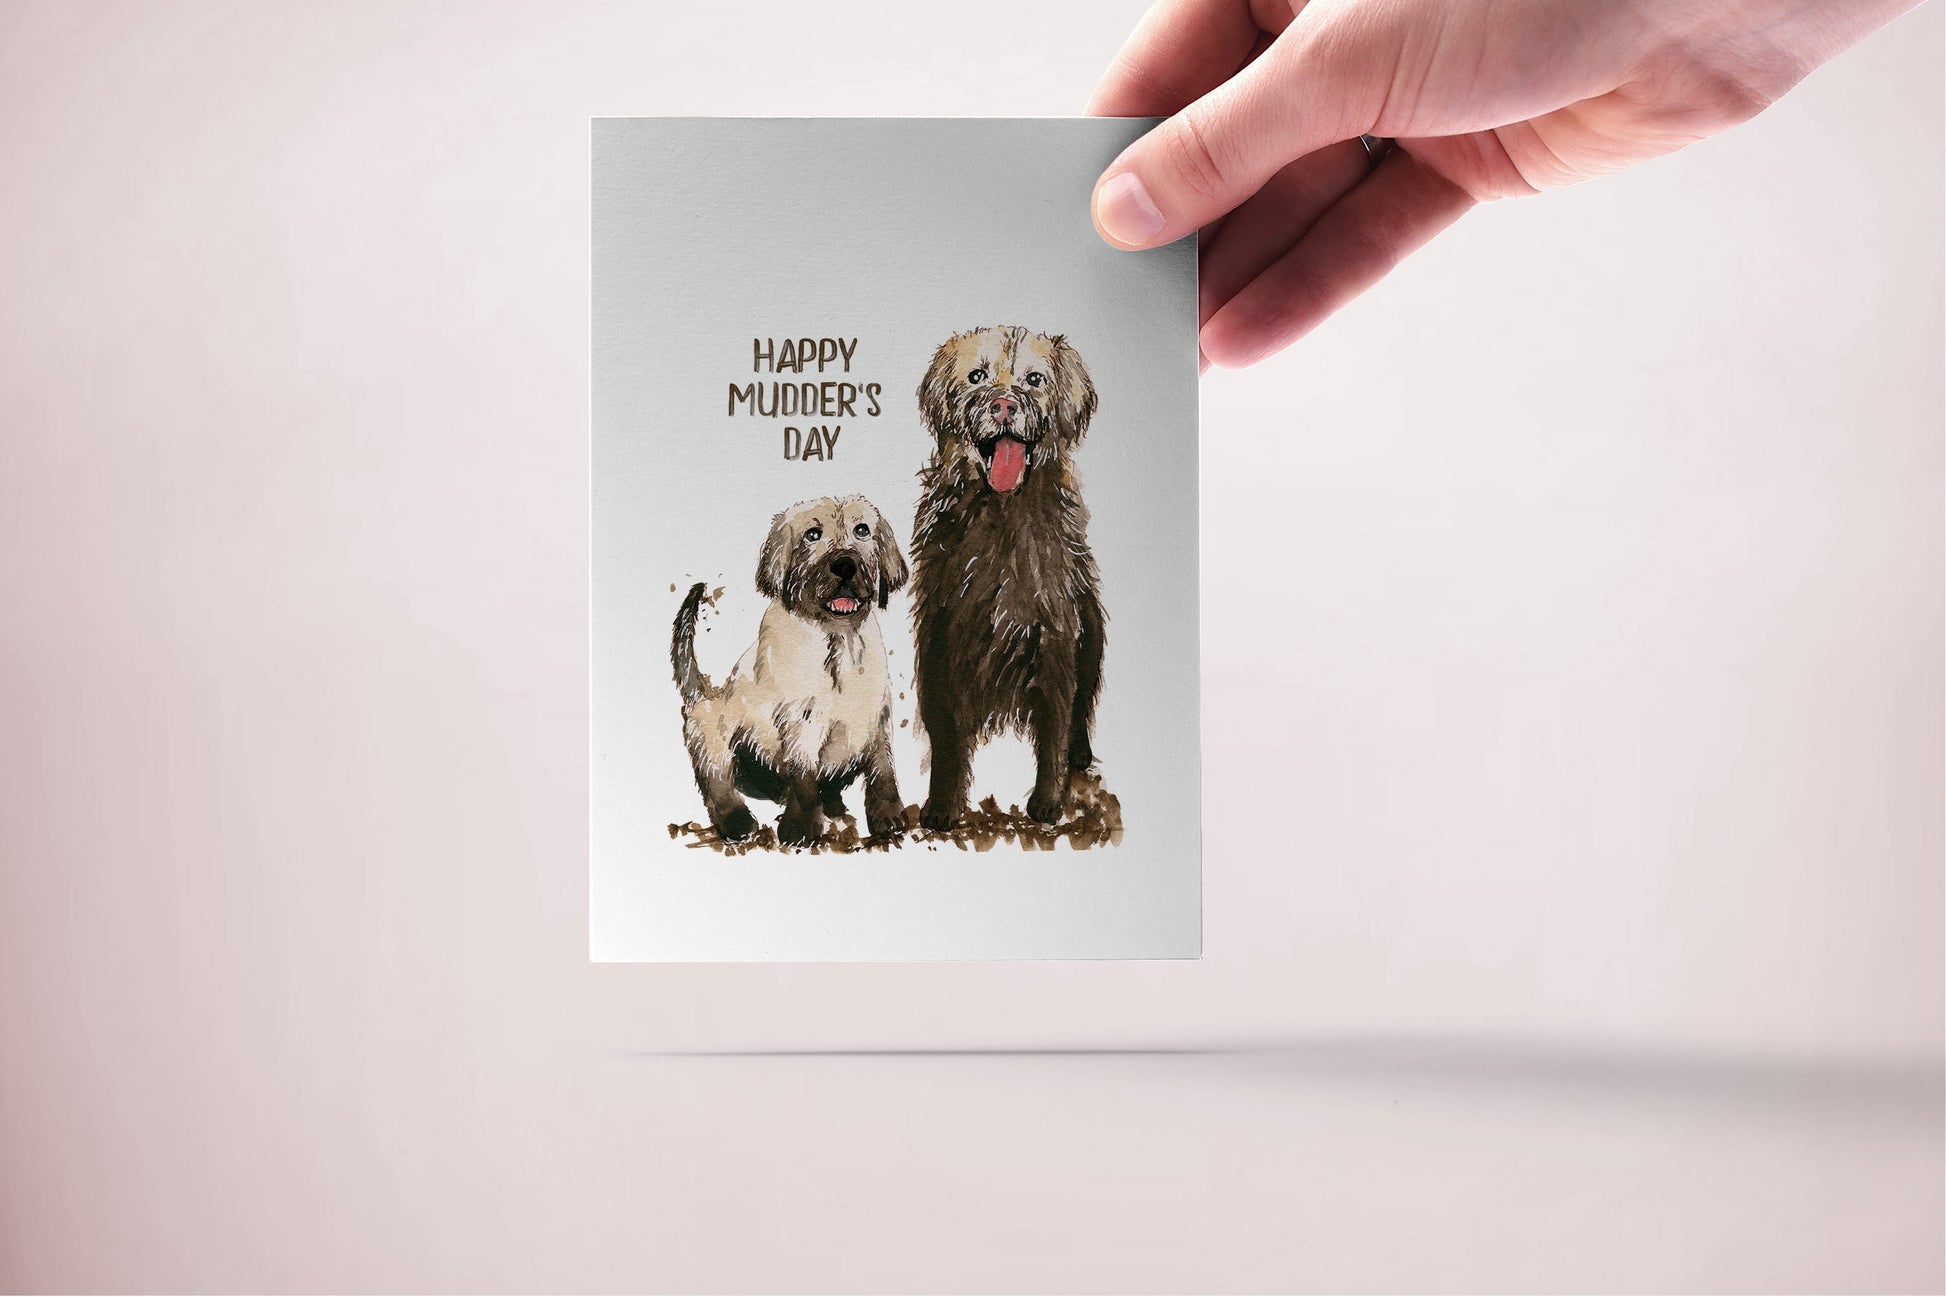 Mud Dog Mother's Day Card Funny - Happy Mother's Day Cards From The Dog - Golden Retriever Dog Mom Gifts